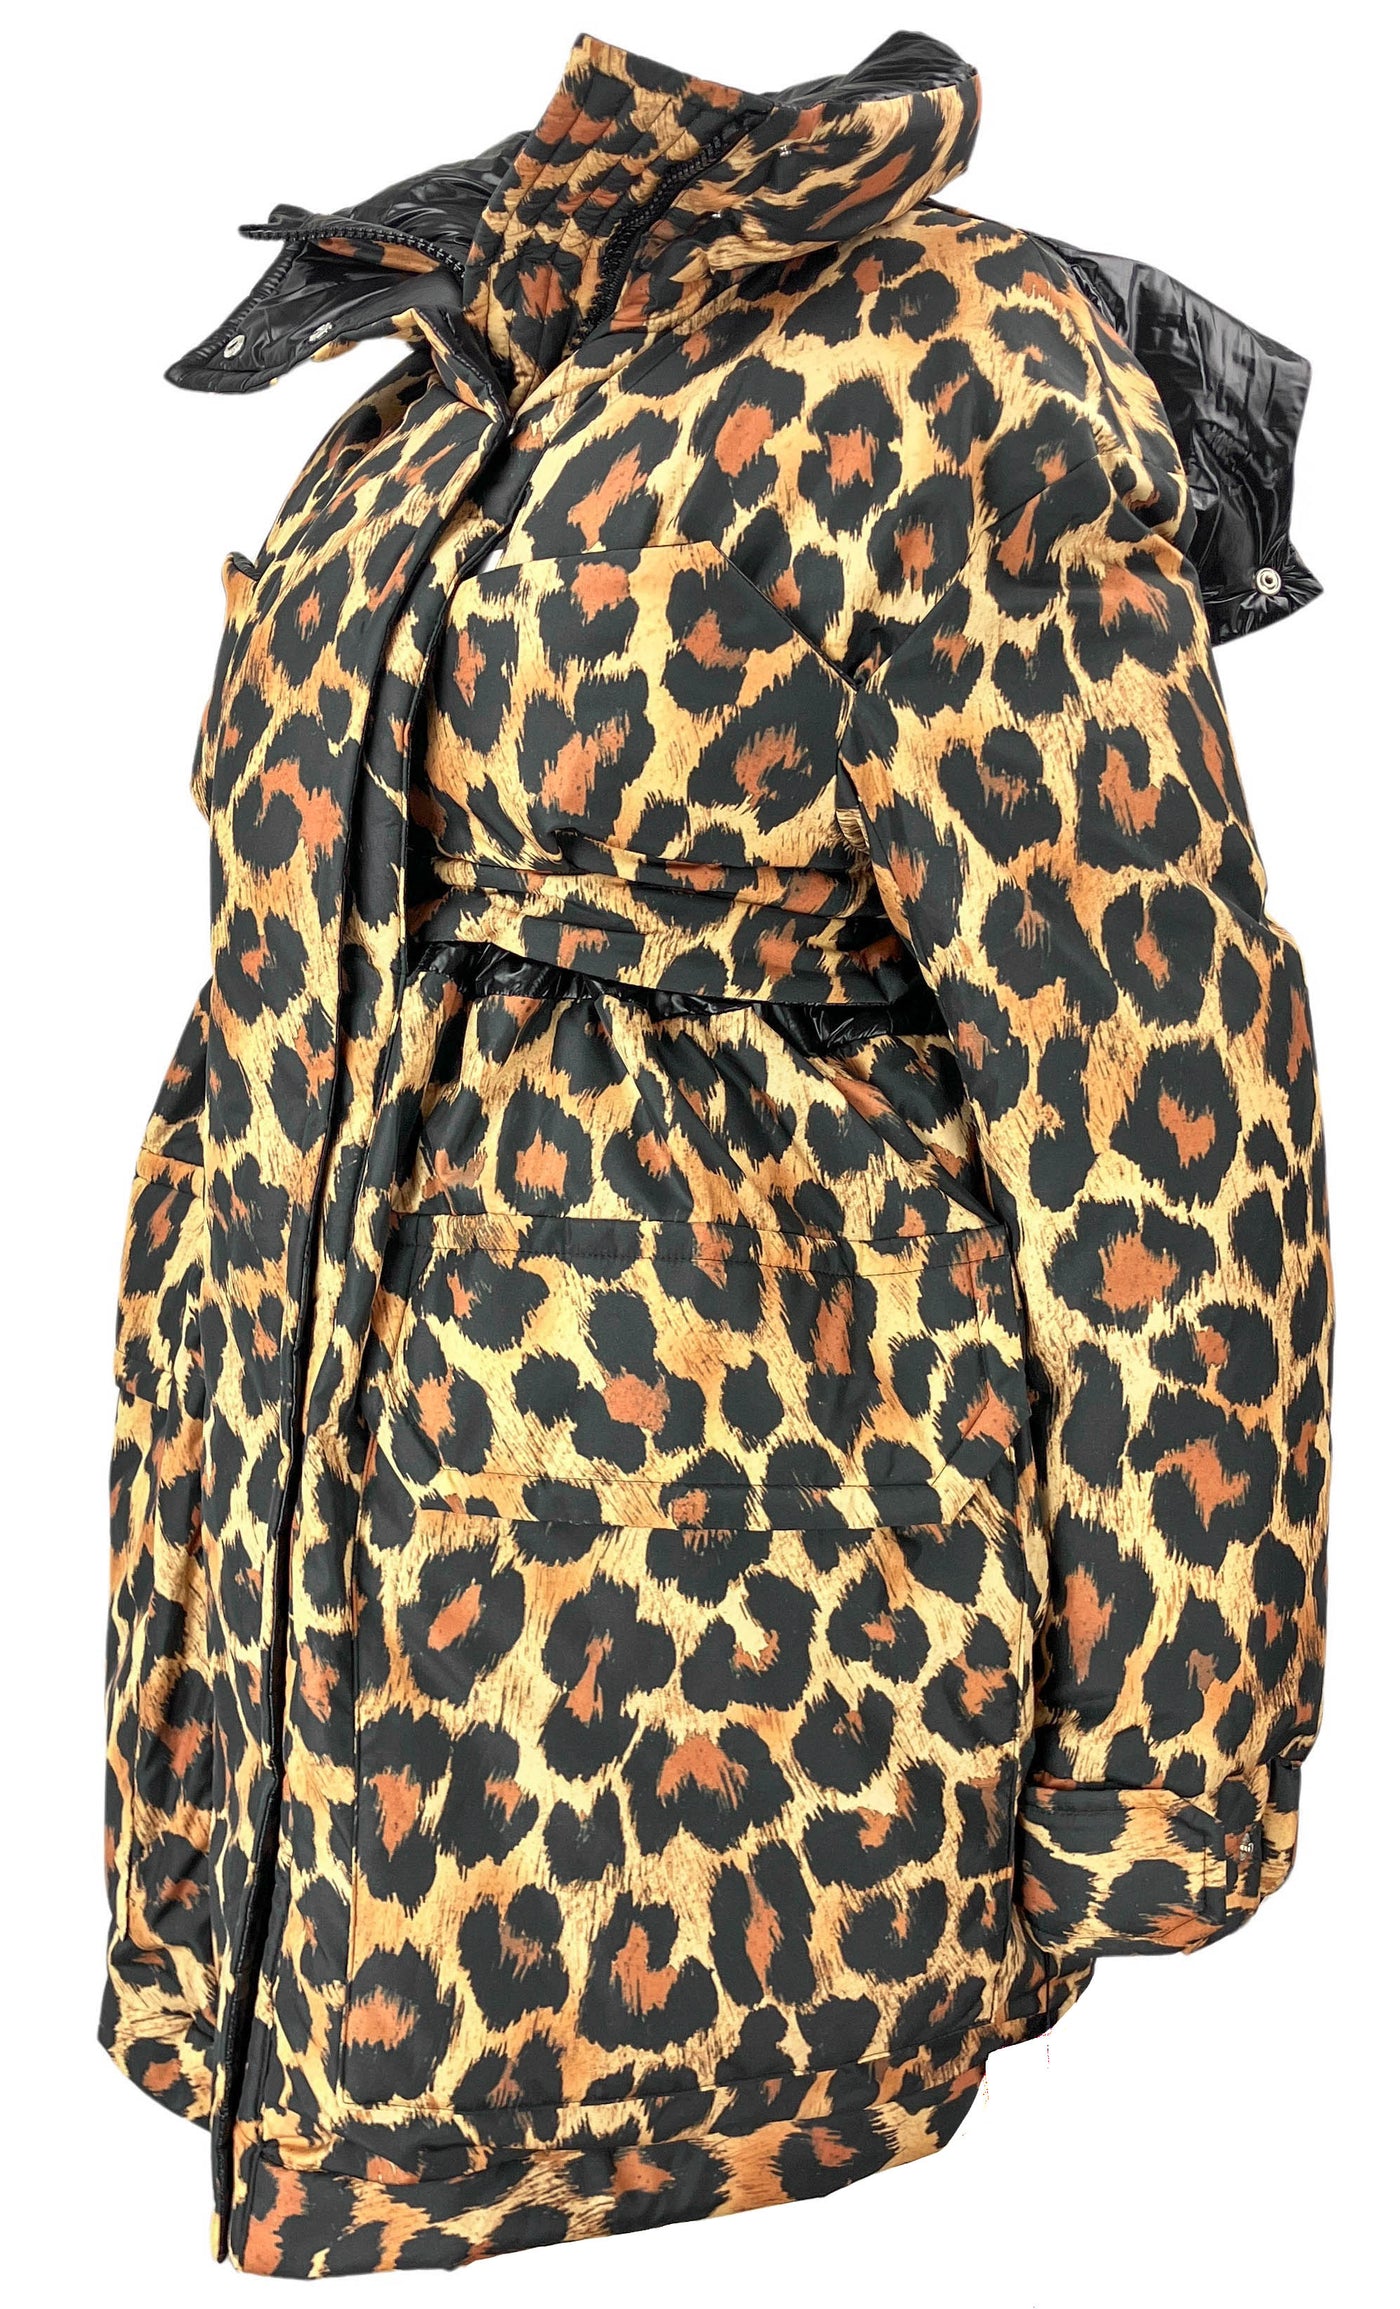 sacai Leopard Print Hooded Puffer Jacket in Brown - Discounts on sacai at UAL